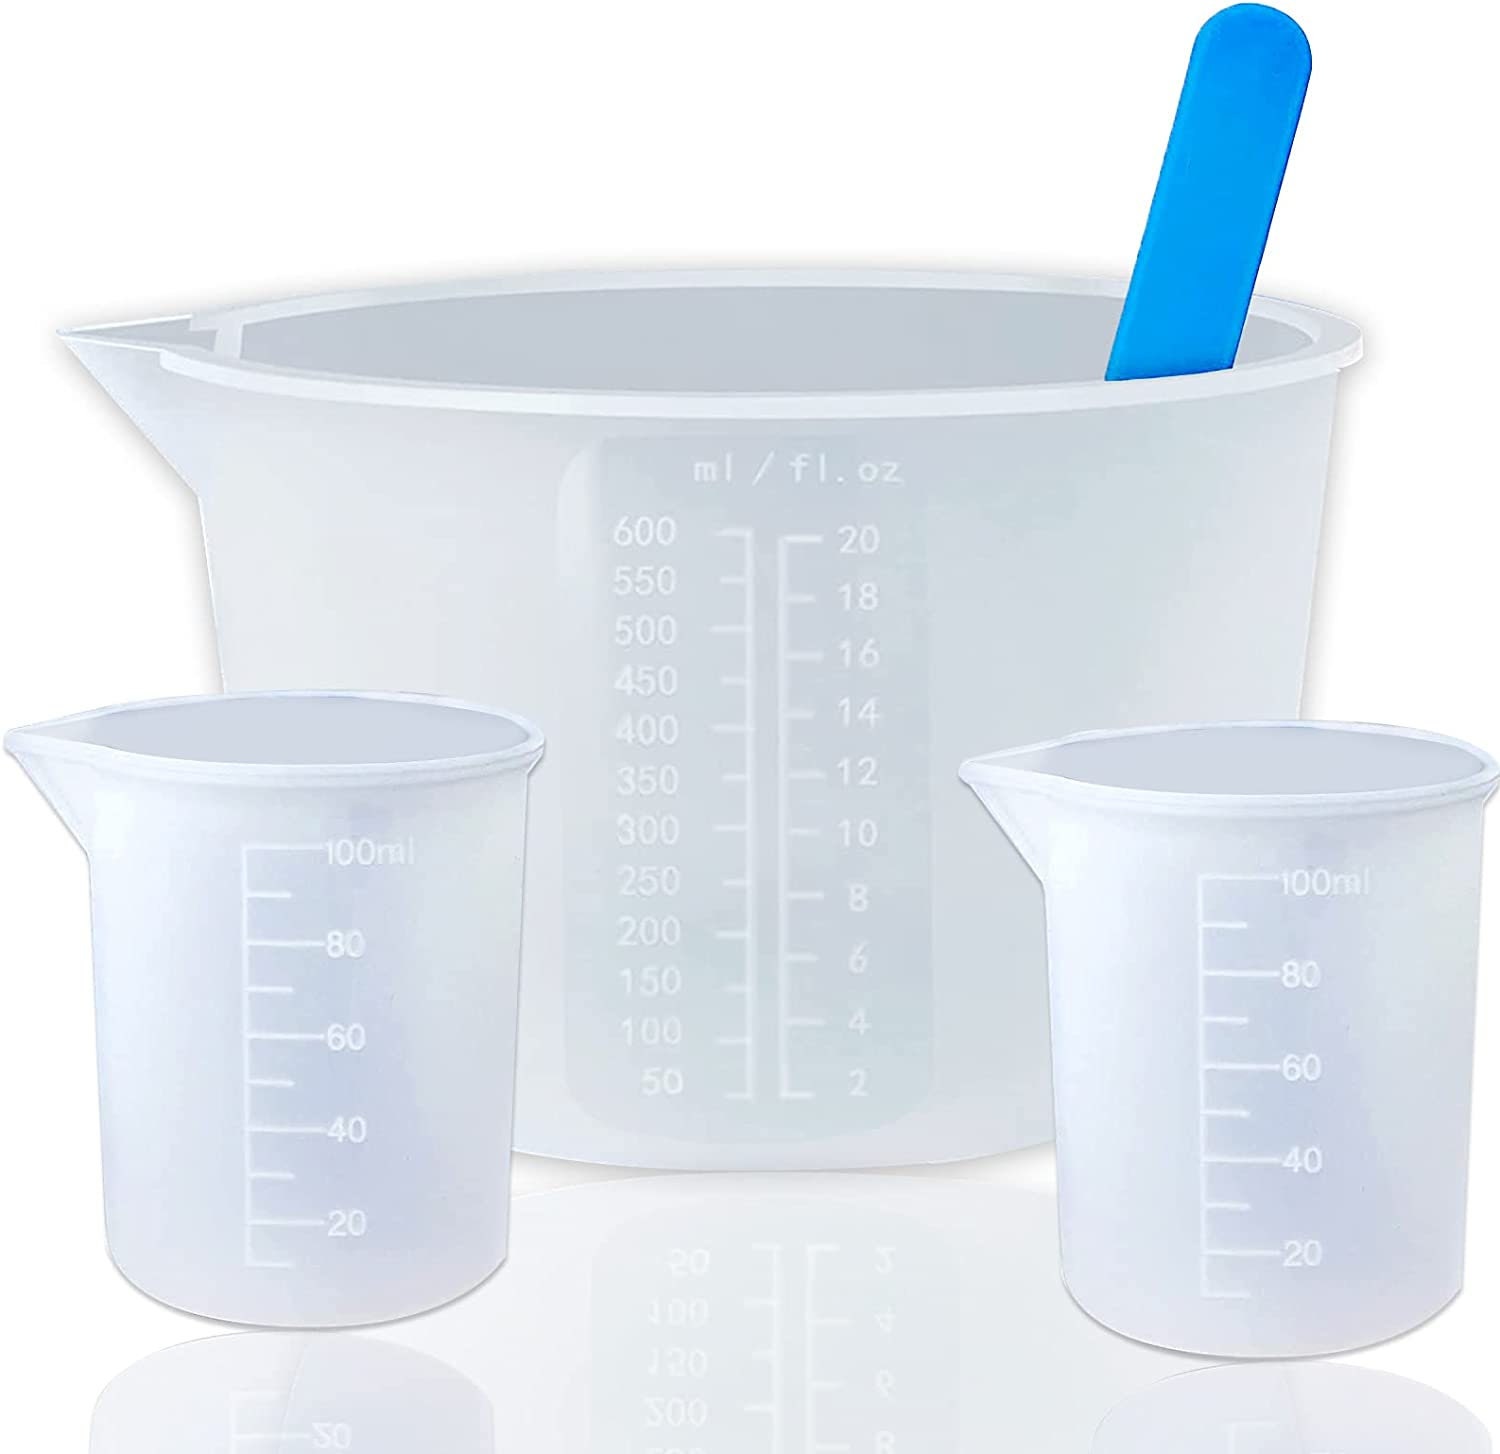 16 oz - 2 Cup 450 ml - Disposable Measuring Cups - Plastic Graduated Mixing Cups - for Mixing Resin/Epoxy, Paint, Cooking, Baking and Crafts (12